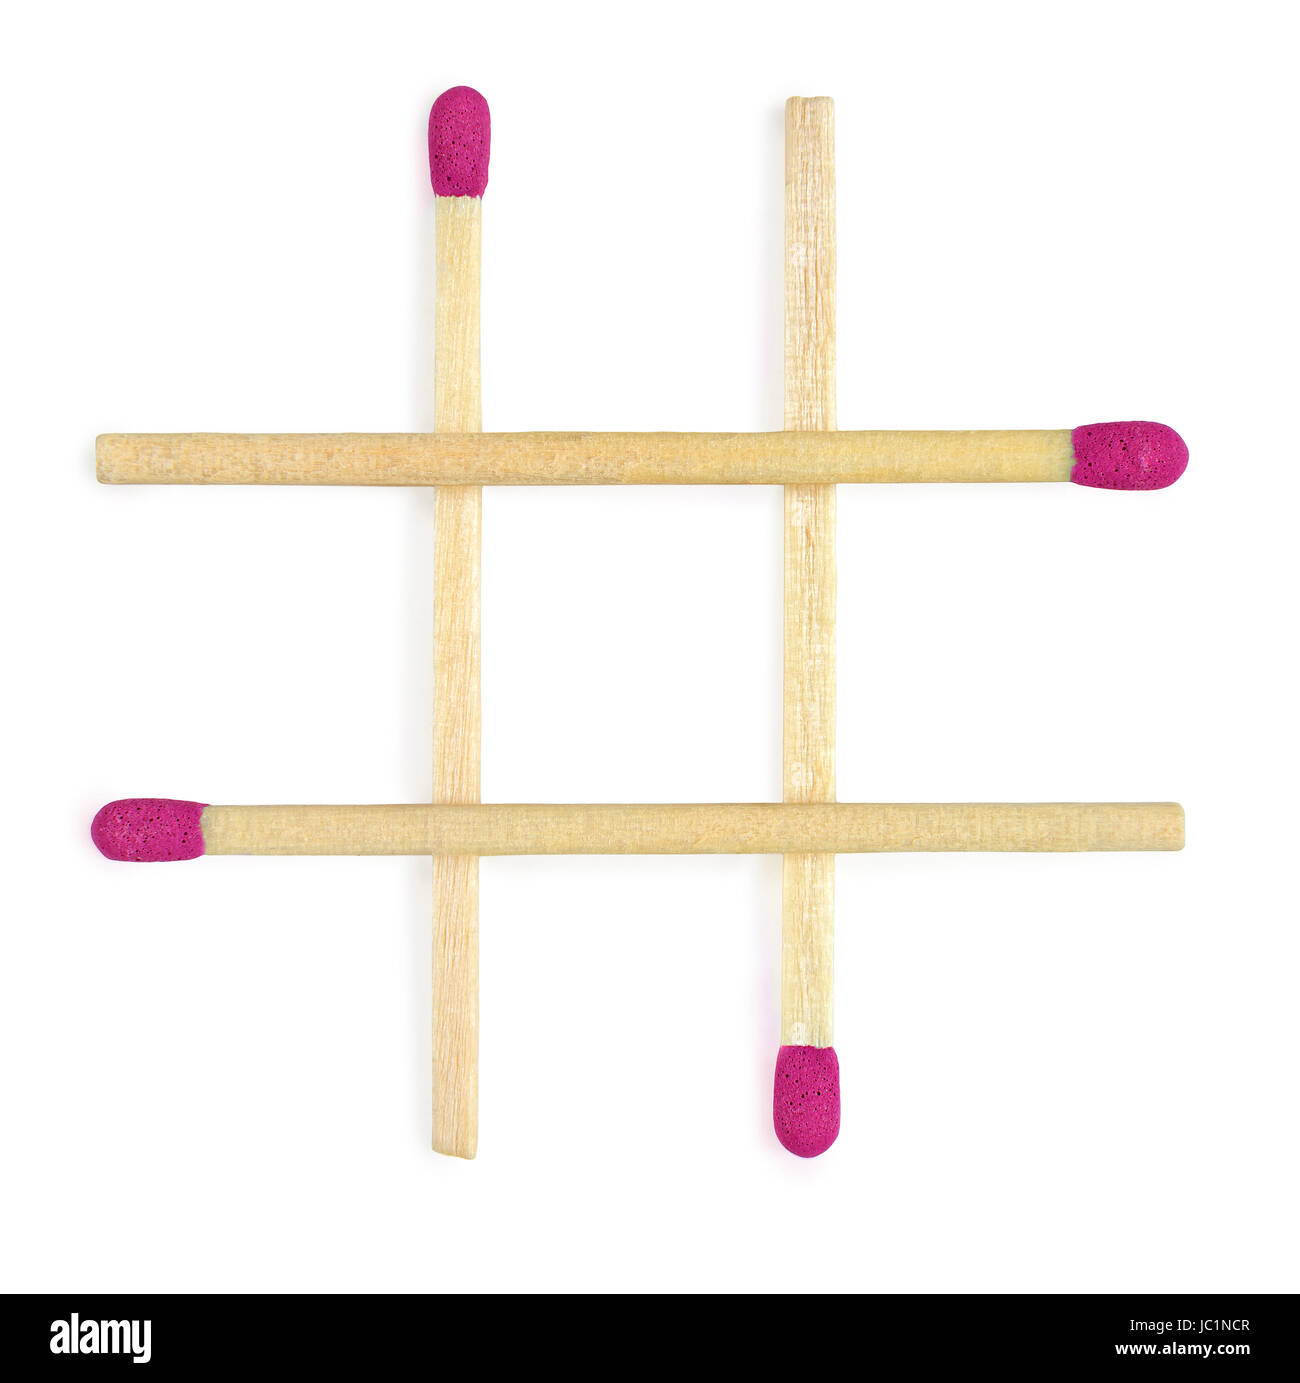 Colored matches stock image. Image of matches, abstract - 45975663